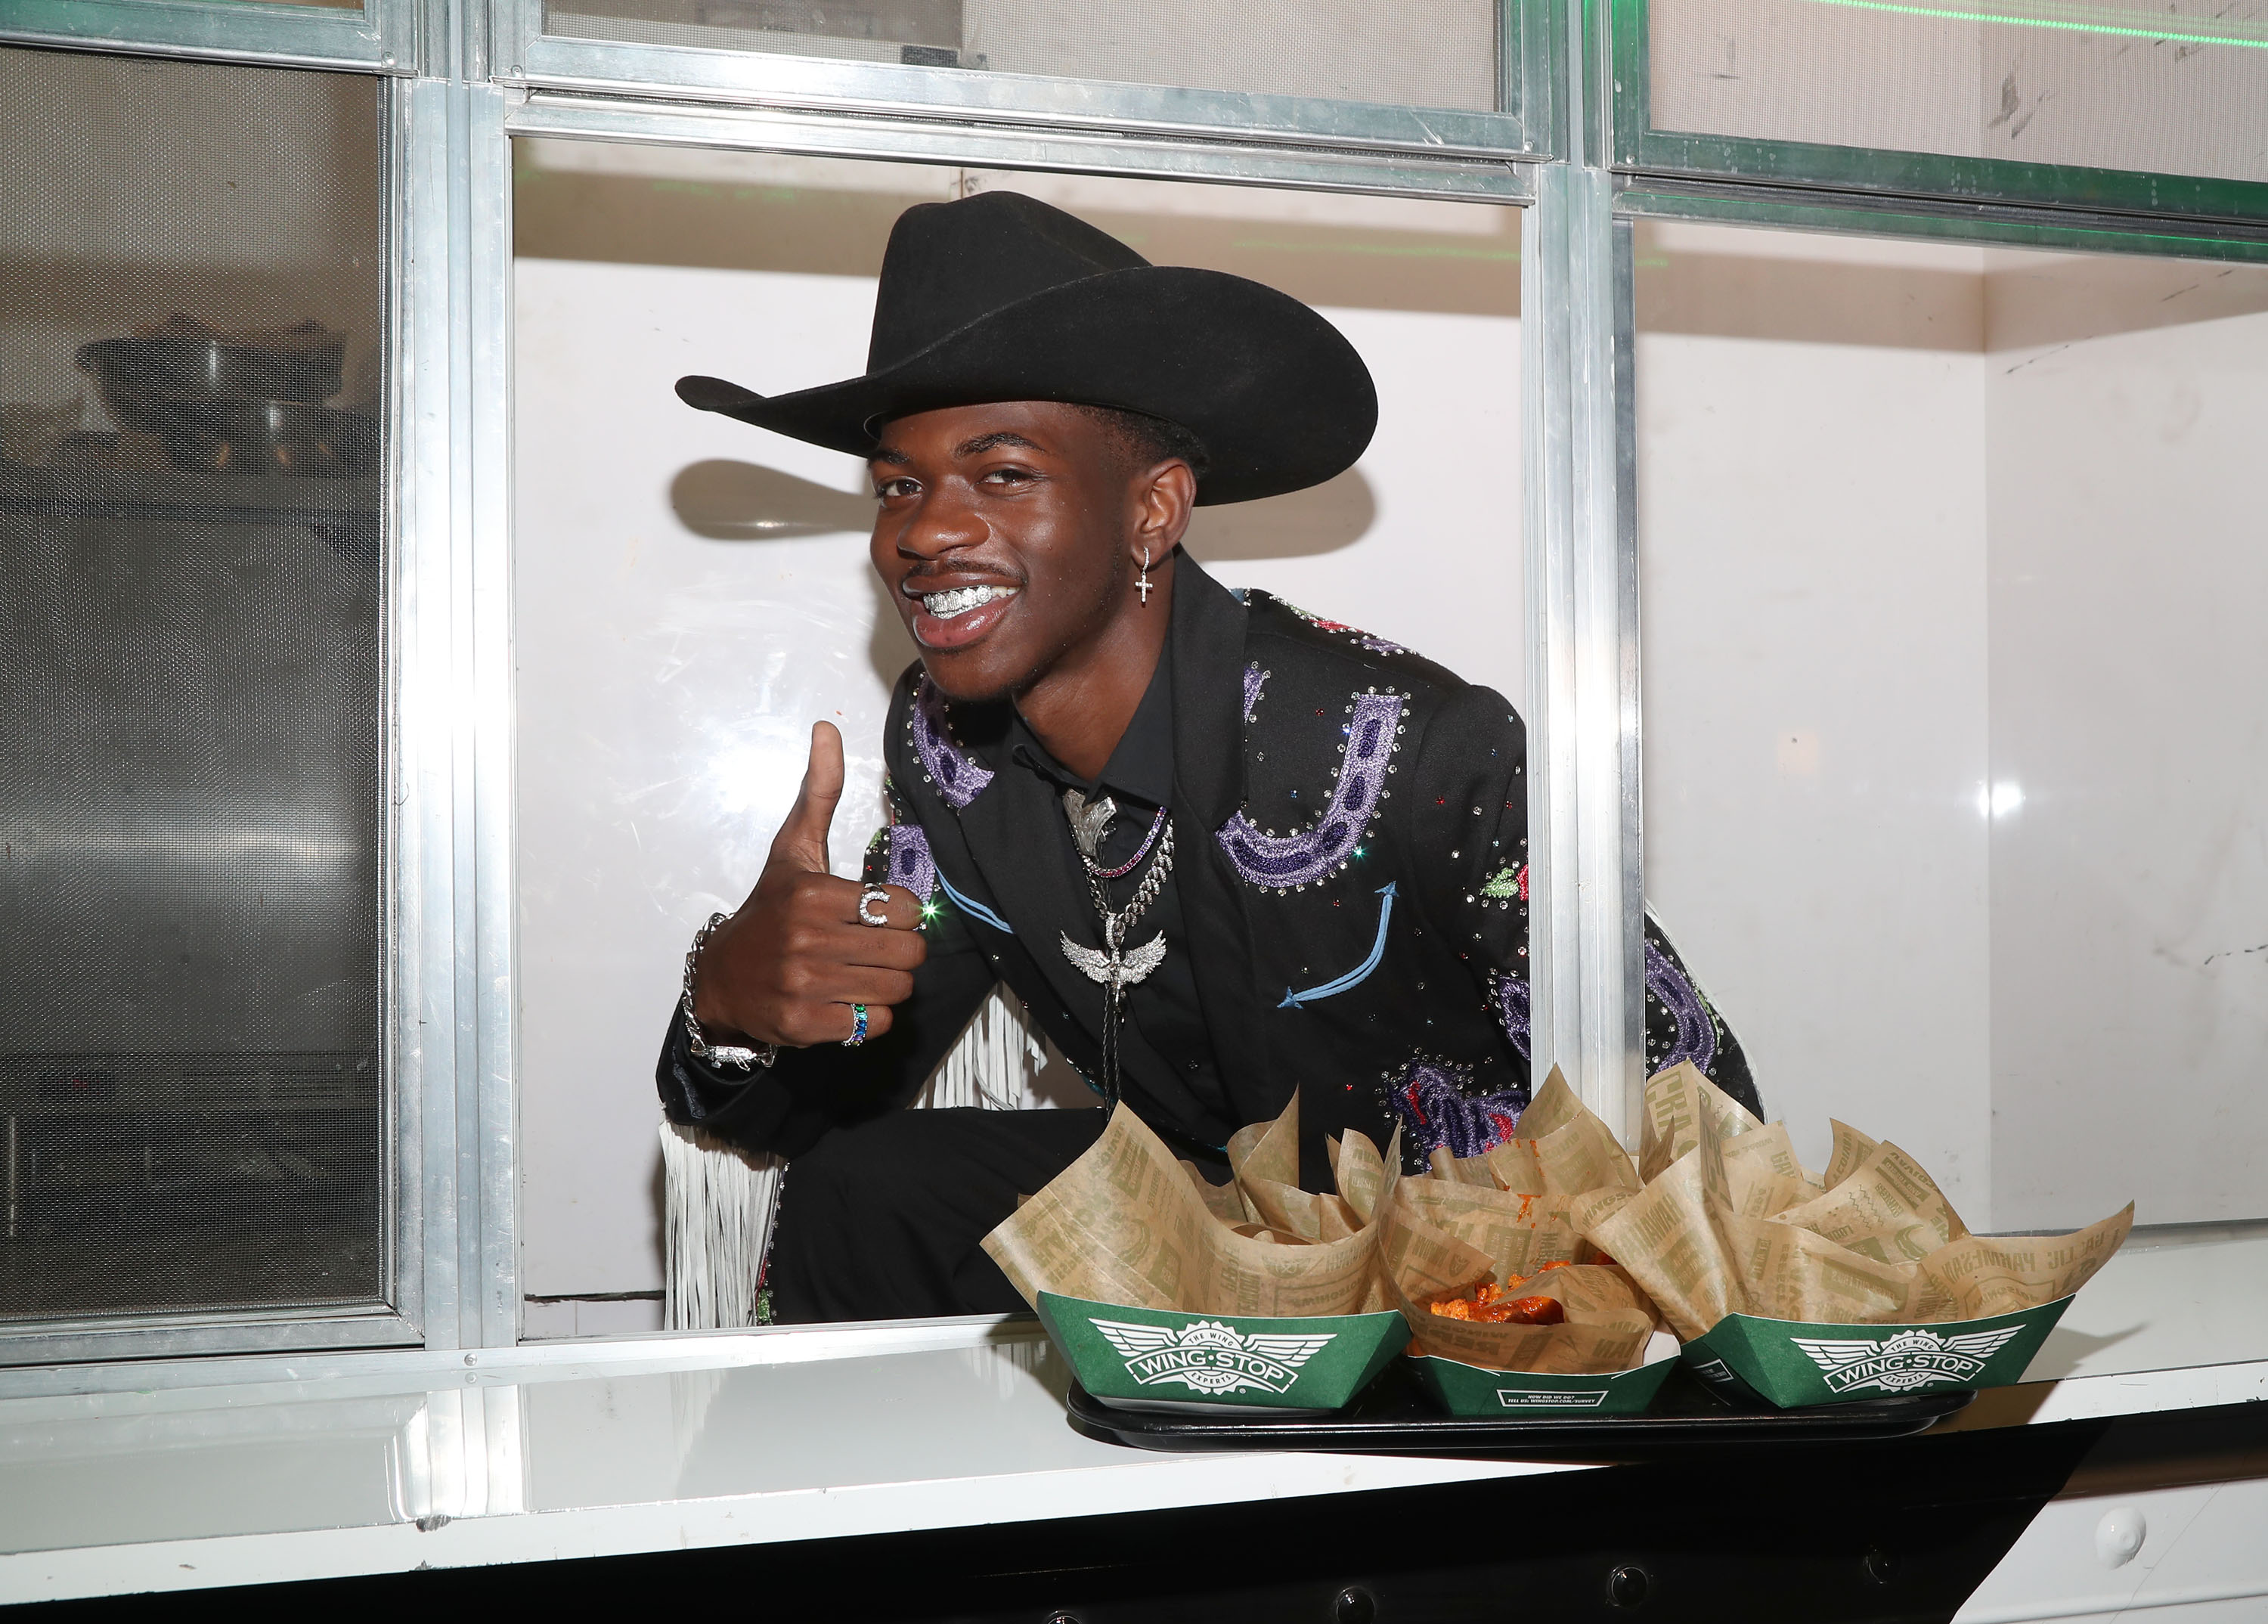 Country Music Fans Are Upset That Lil Nas X Partnered With Wrangler Jeans